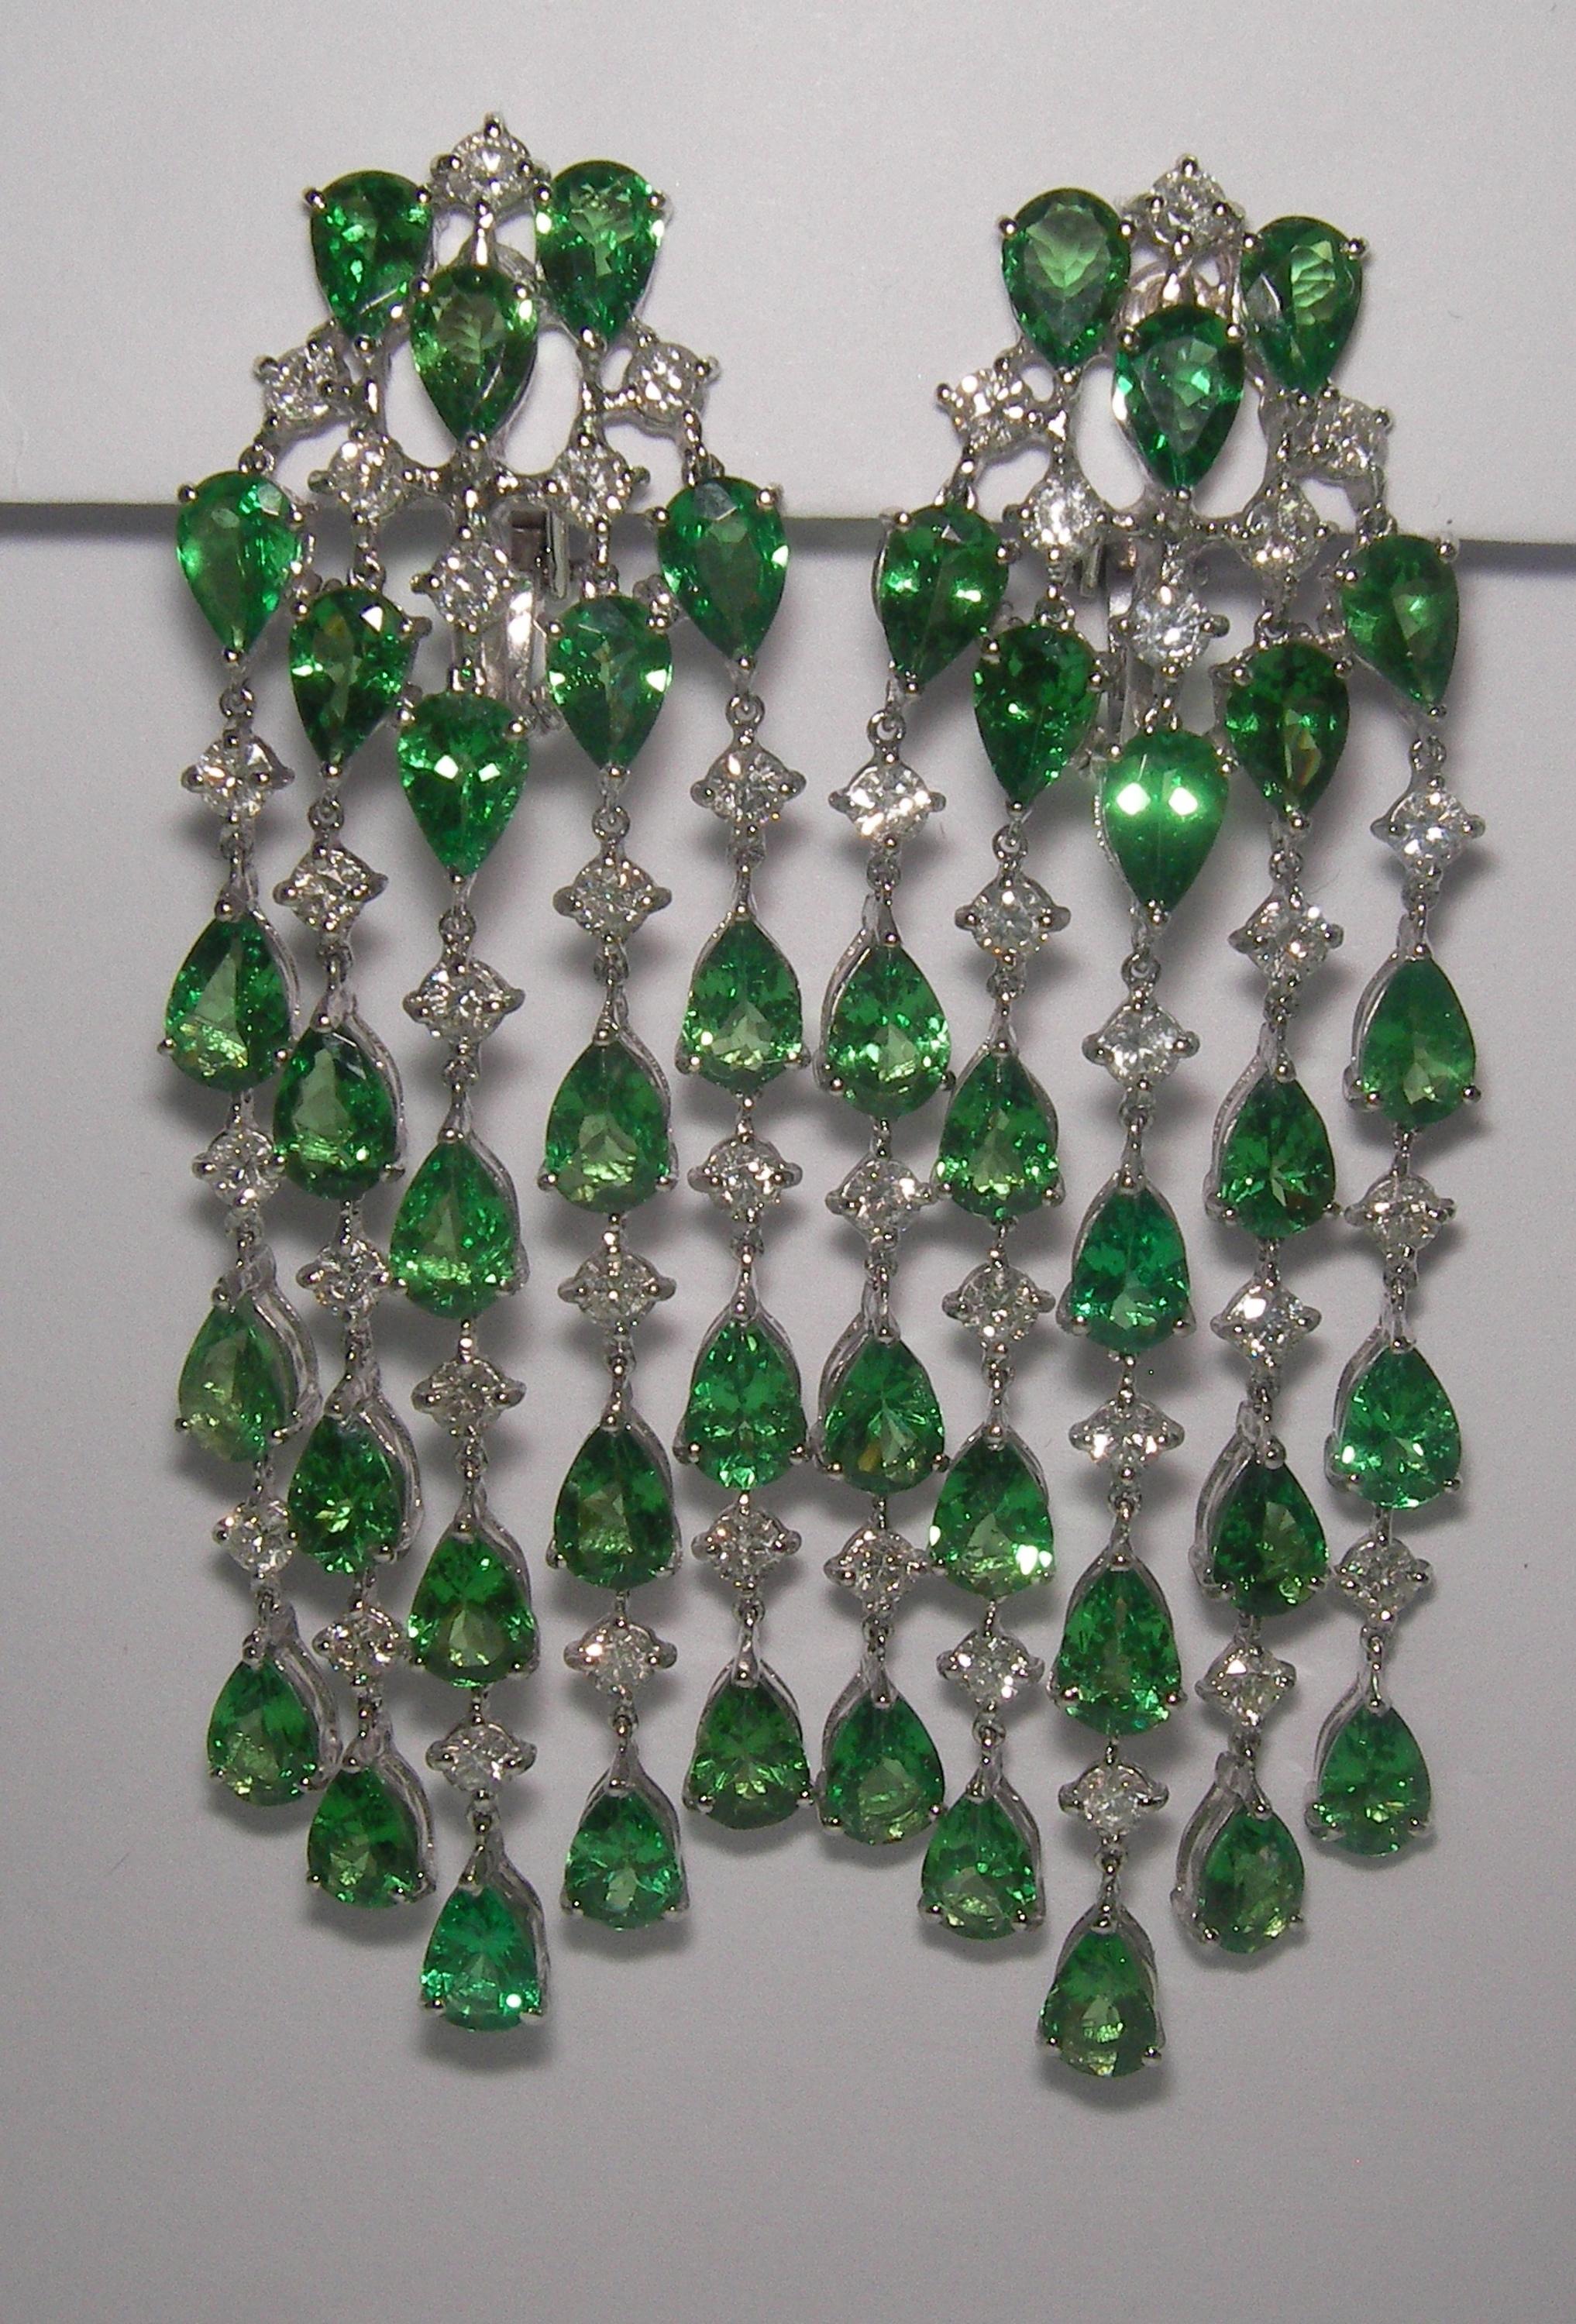 18 Karat White Gold Diamond and Tsavotite Dangle Earrings

42 Diamonds 2,79 Carat H SI
42 Tsavorite 18.30 Carat


Founded in 1974, Gianni Lazzaro is a family-owned jewelry company based out of Düsseldorf, Germany.
Although rooted in Germany, Gianni